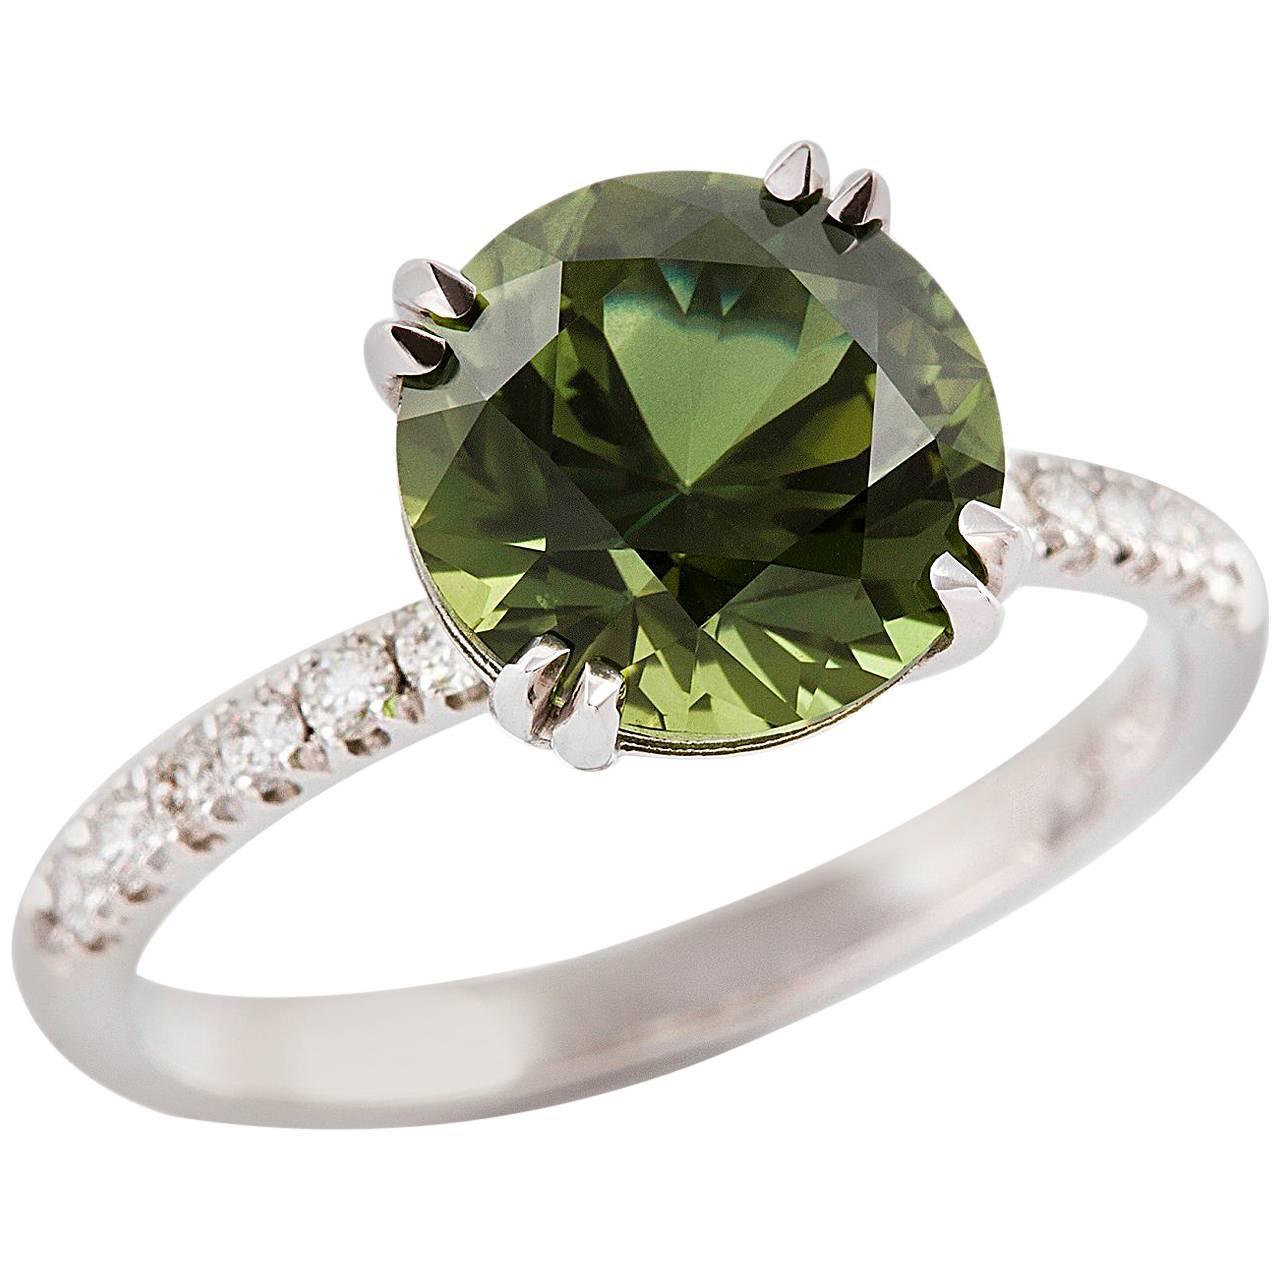 
Verde & Bianca Ring

Simply charming! This 18ct white gold ring is set with a beautiful green sapphire which has petite finest white diamonds on either side.

Round faceted sapphire: medium blue-green colour, 3.67ct

Round brilliant cut diamonds: F